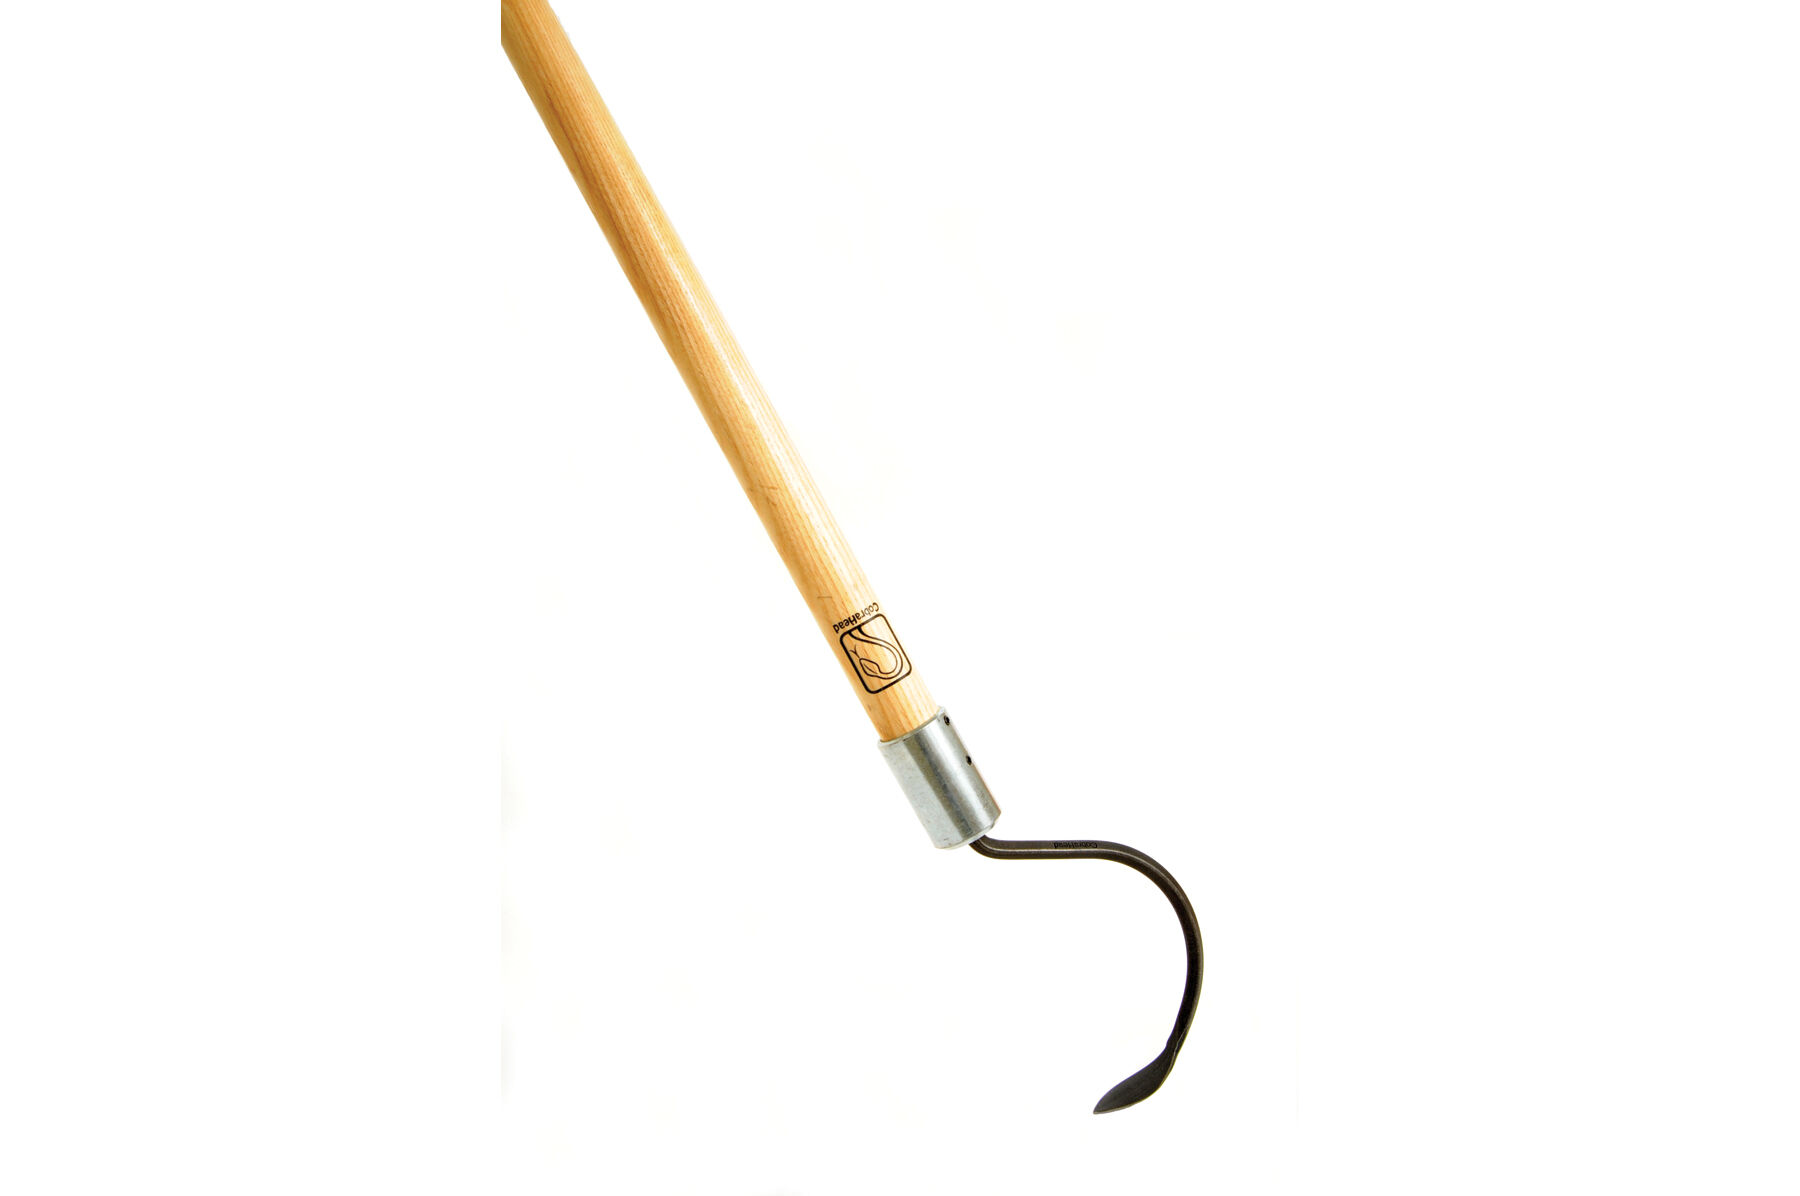 Edging & Planting Perfect for Big Gardening Jobs Ergonomically Designed for Digging Forged Steel Blade Natural 48-Inch Hardwood Handle CobraHead Long Handle Weeder & Cultivator Garden Tool 